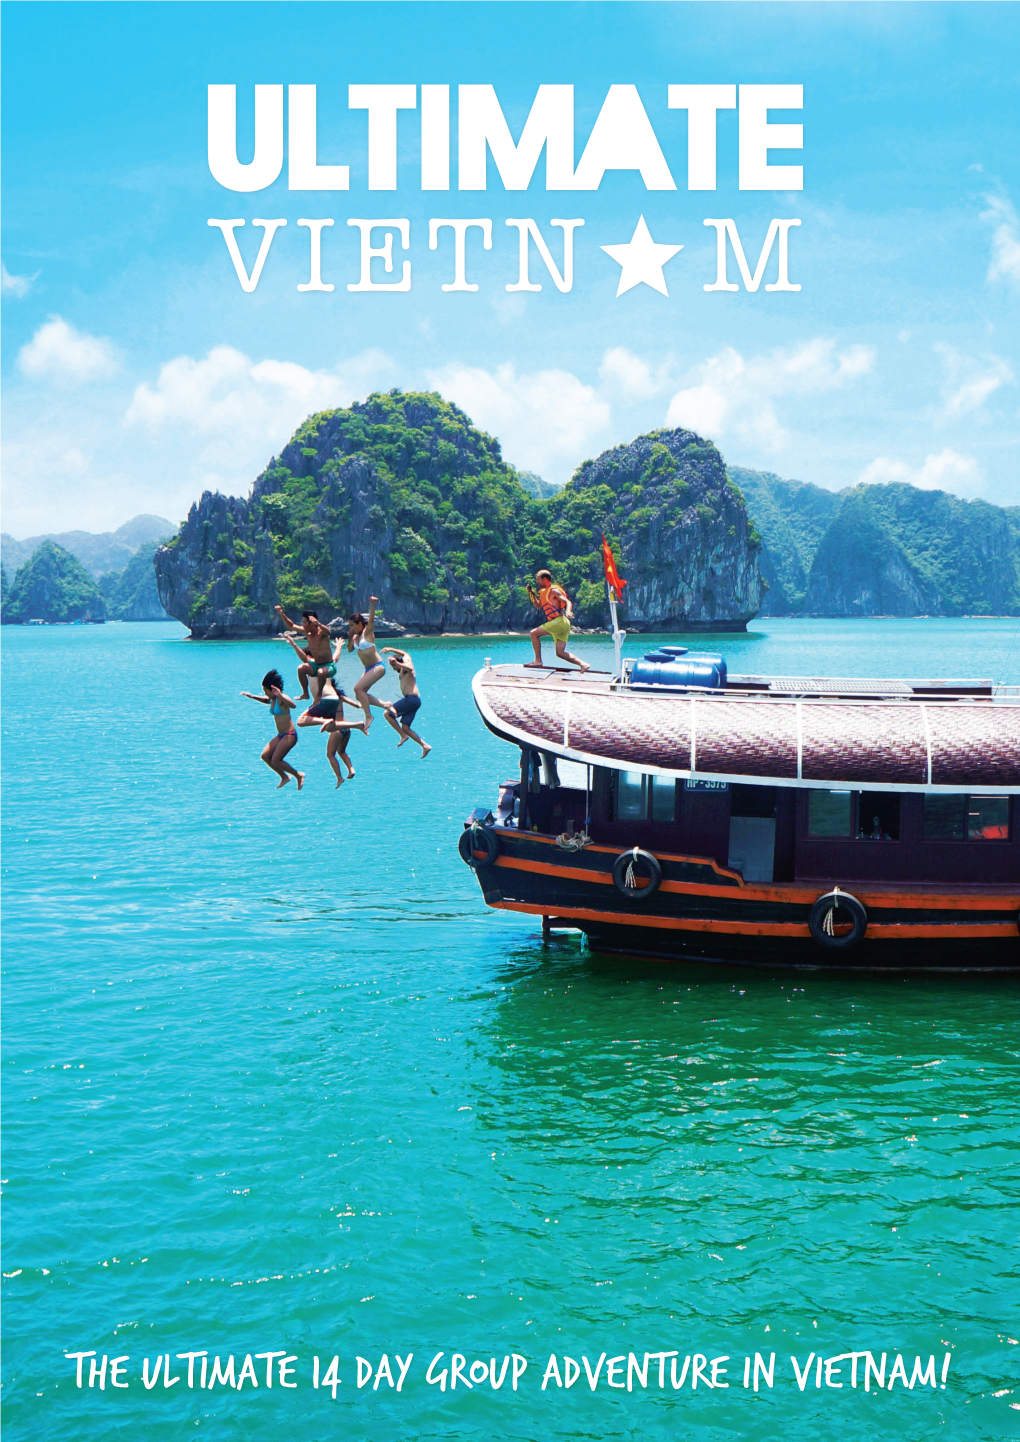 The Ultimate 14 Day Group Adventure in Vietnam! Hi